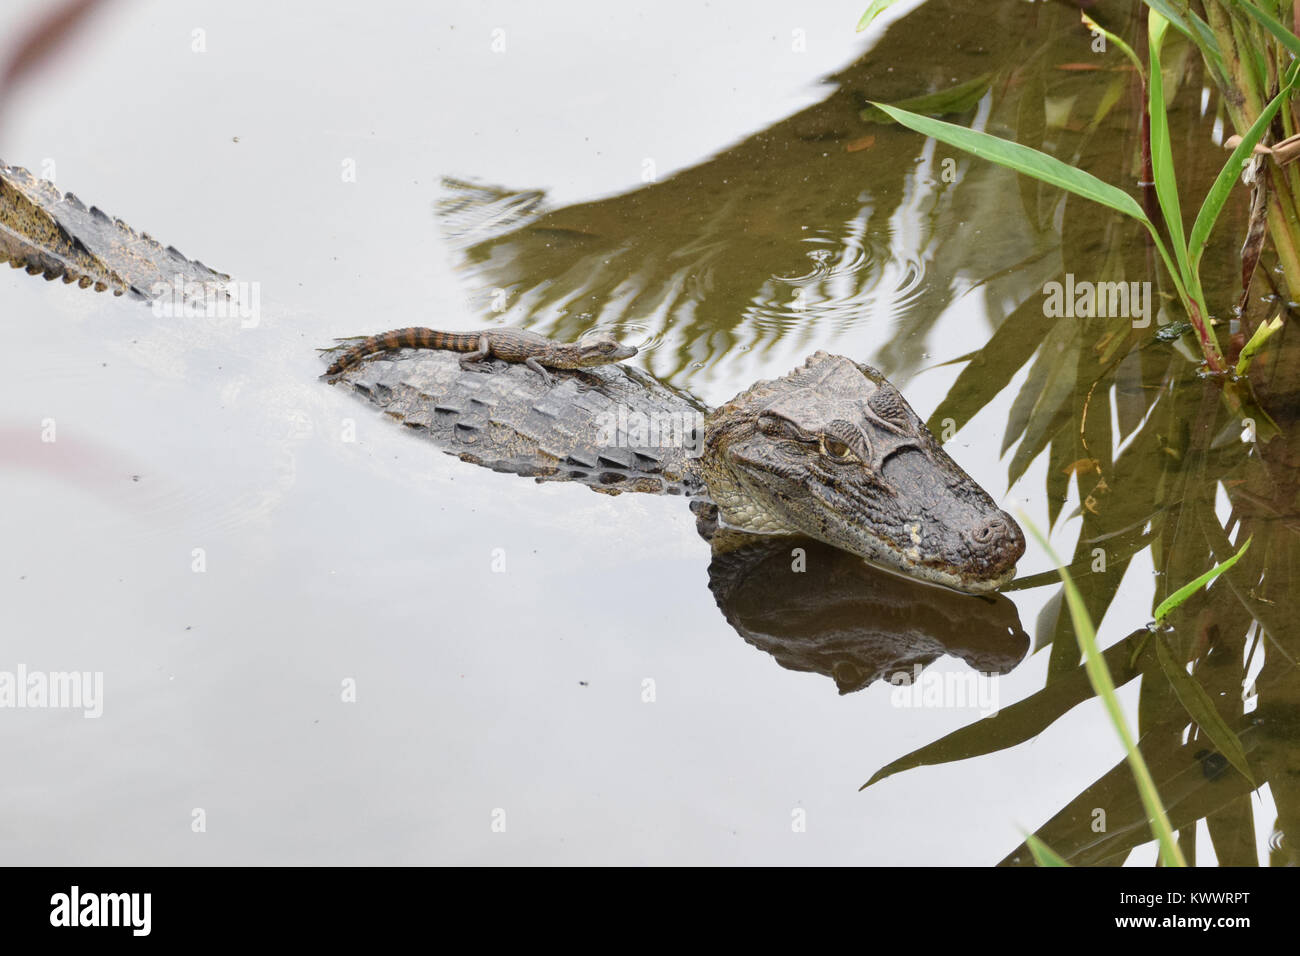 Spectacled Caiman, mother with baby, La Fortuna, Costa Rica Stock Photo